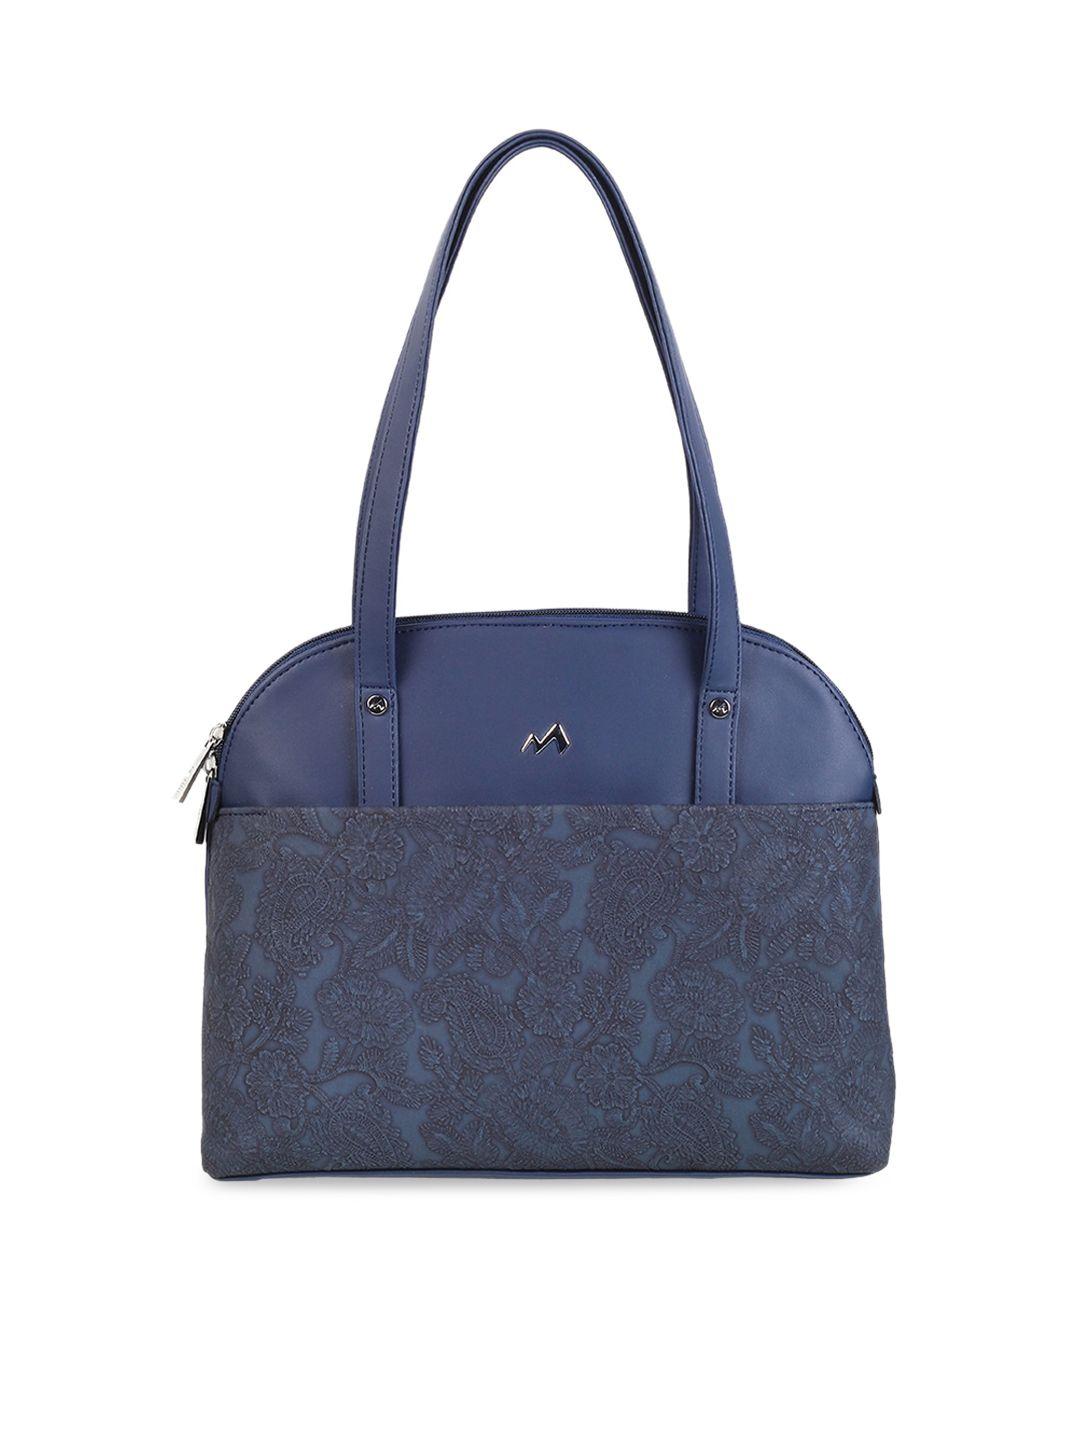 metro blue structured shoulder bag with quilted